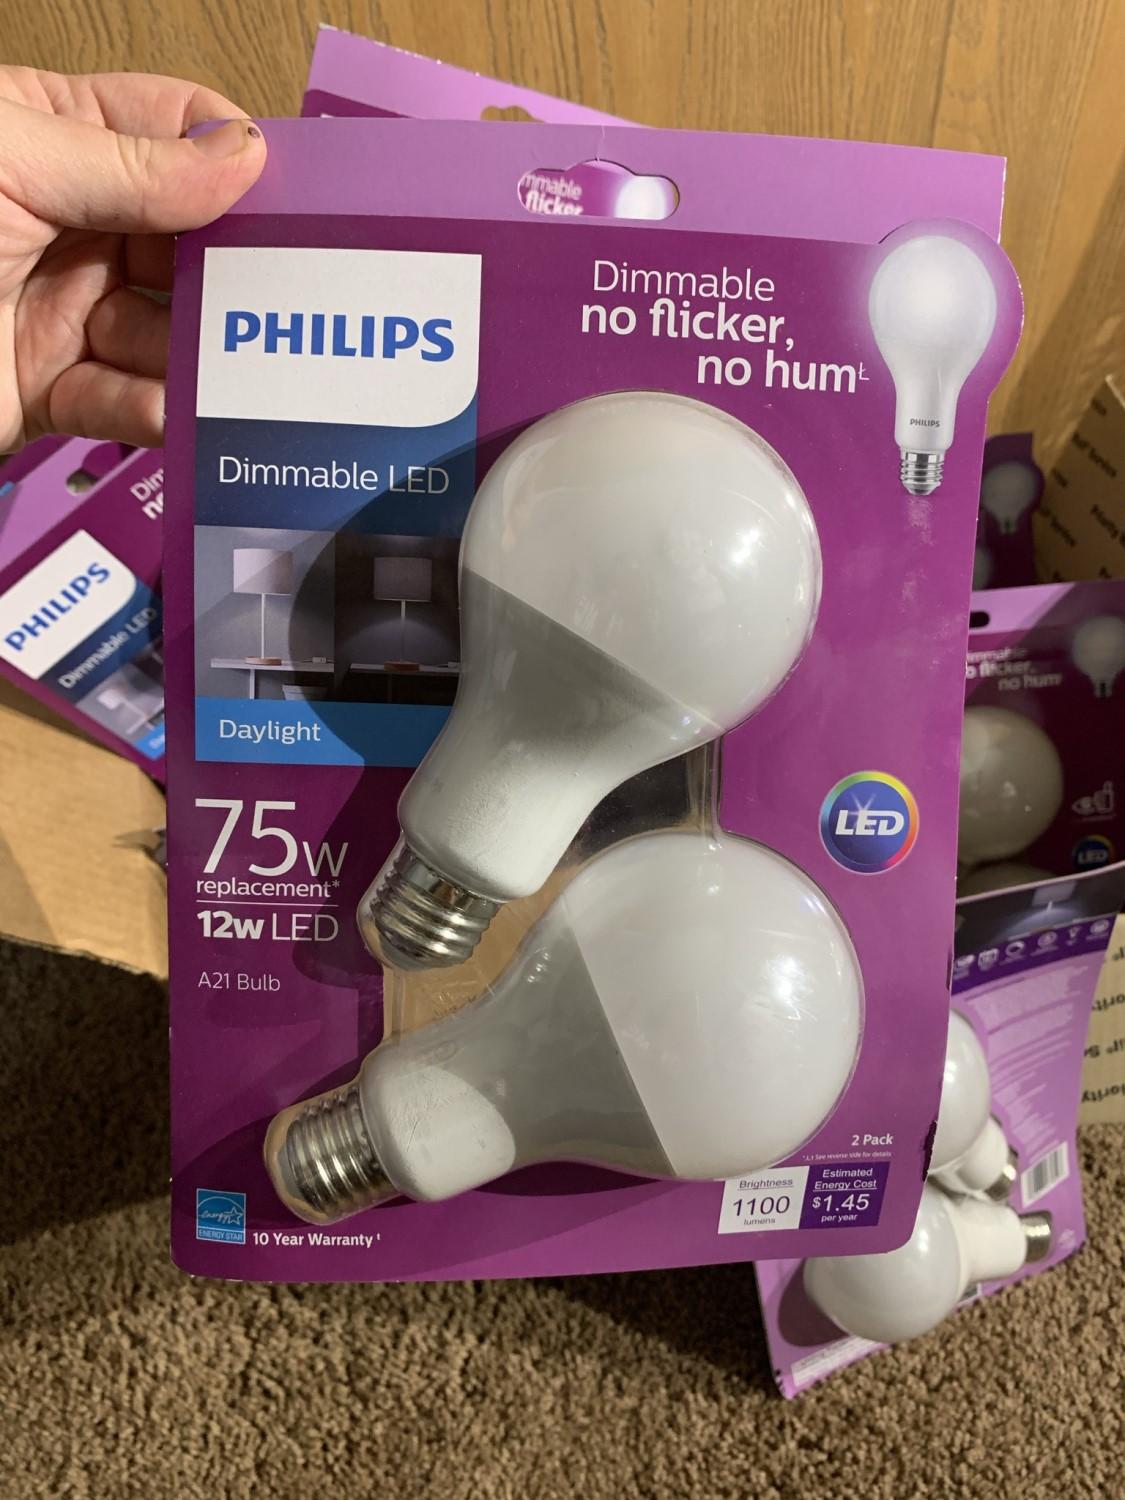 13 New Packages of Philips 75w Light Bulbs